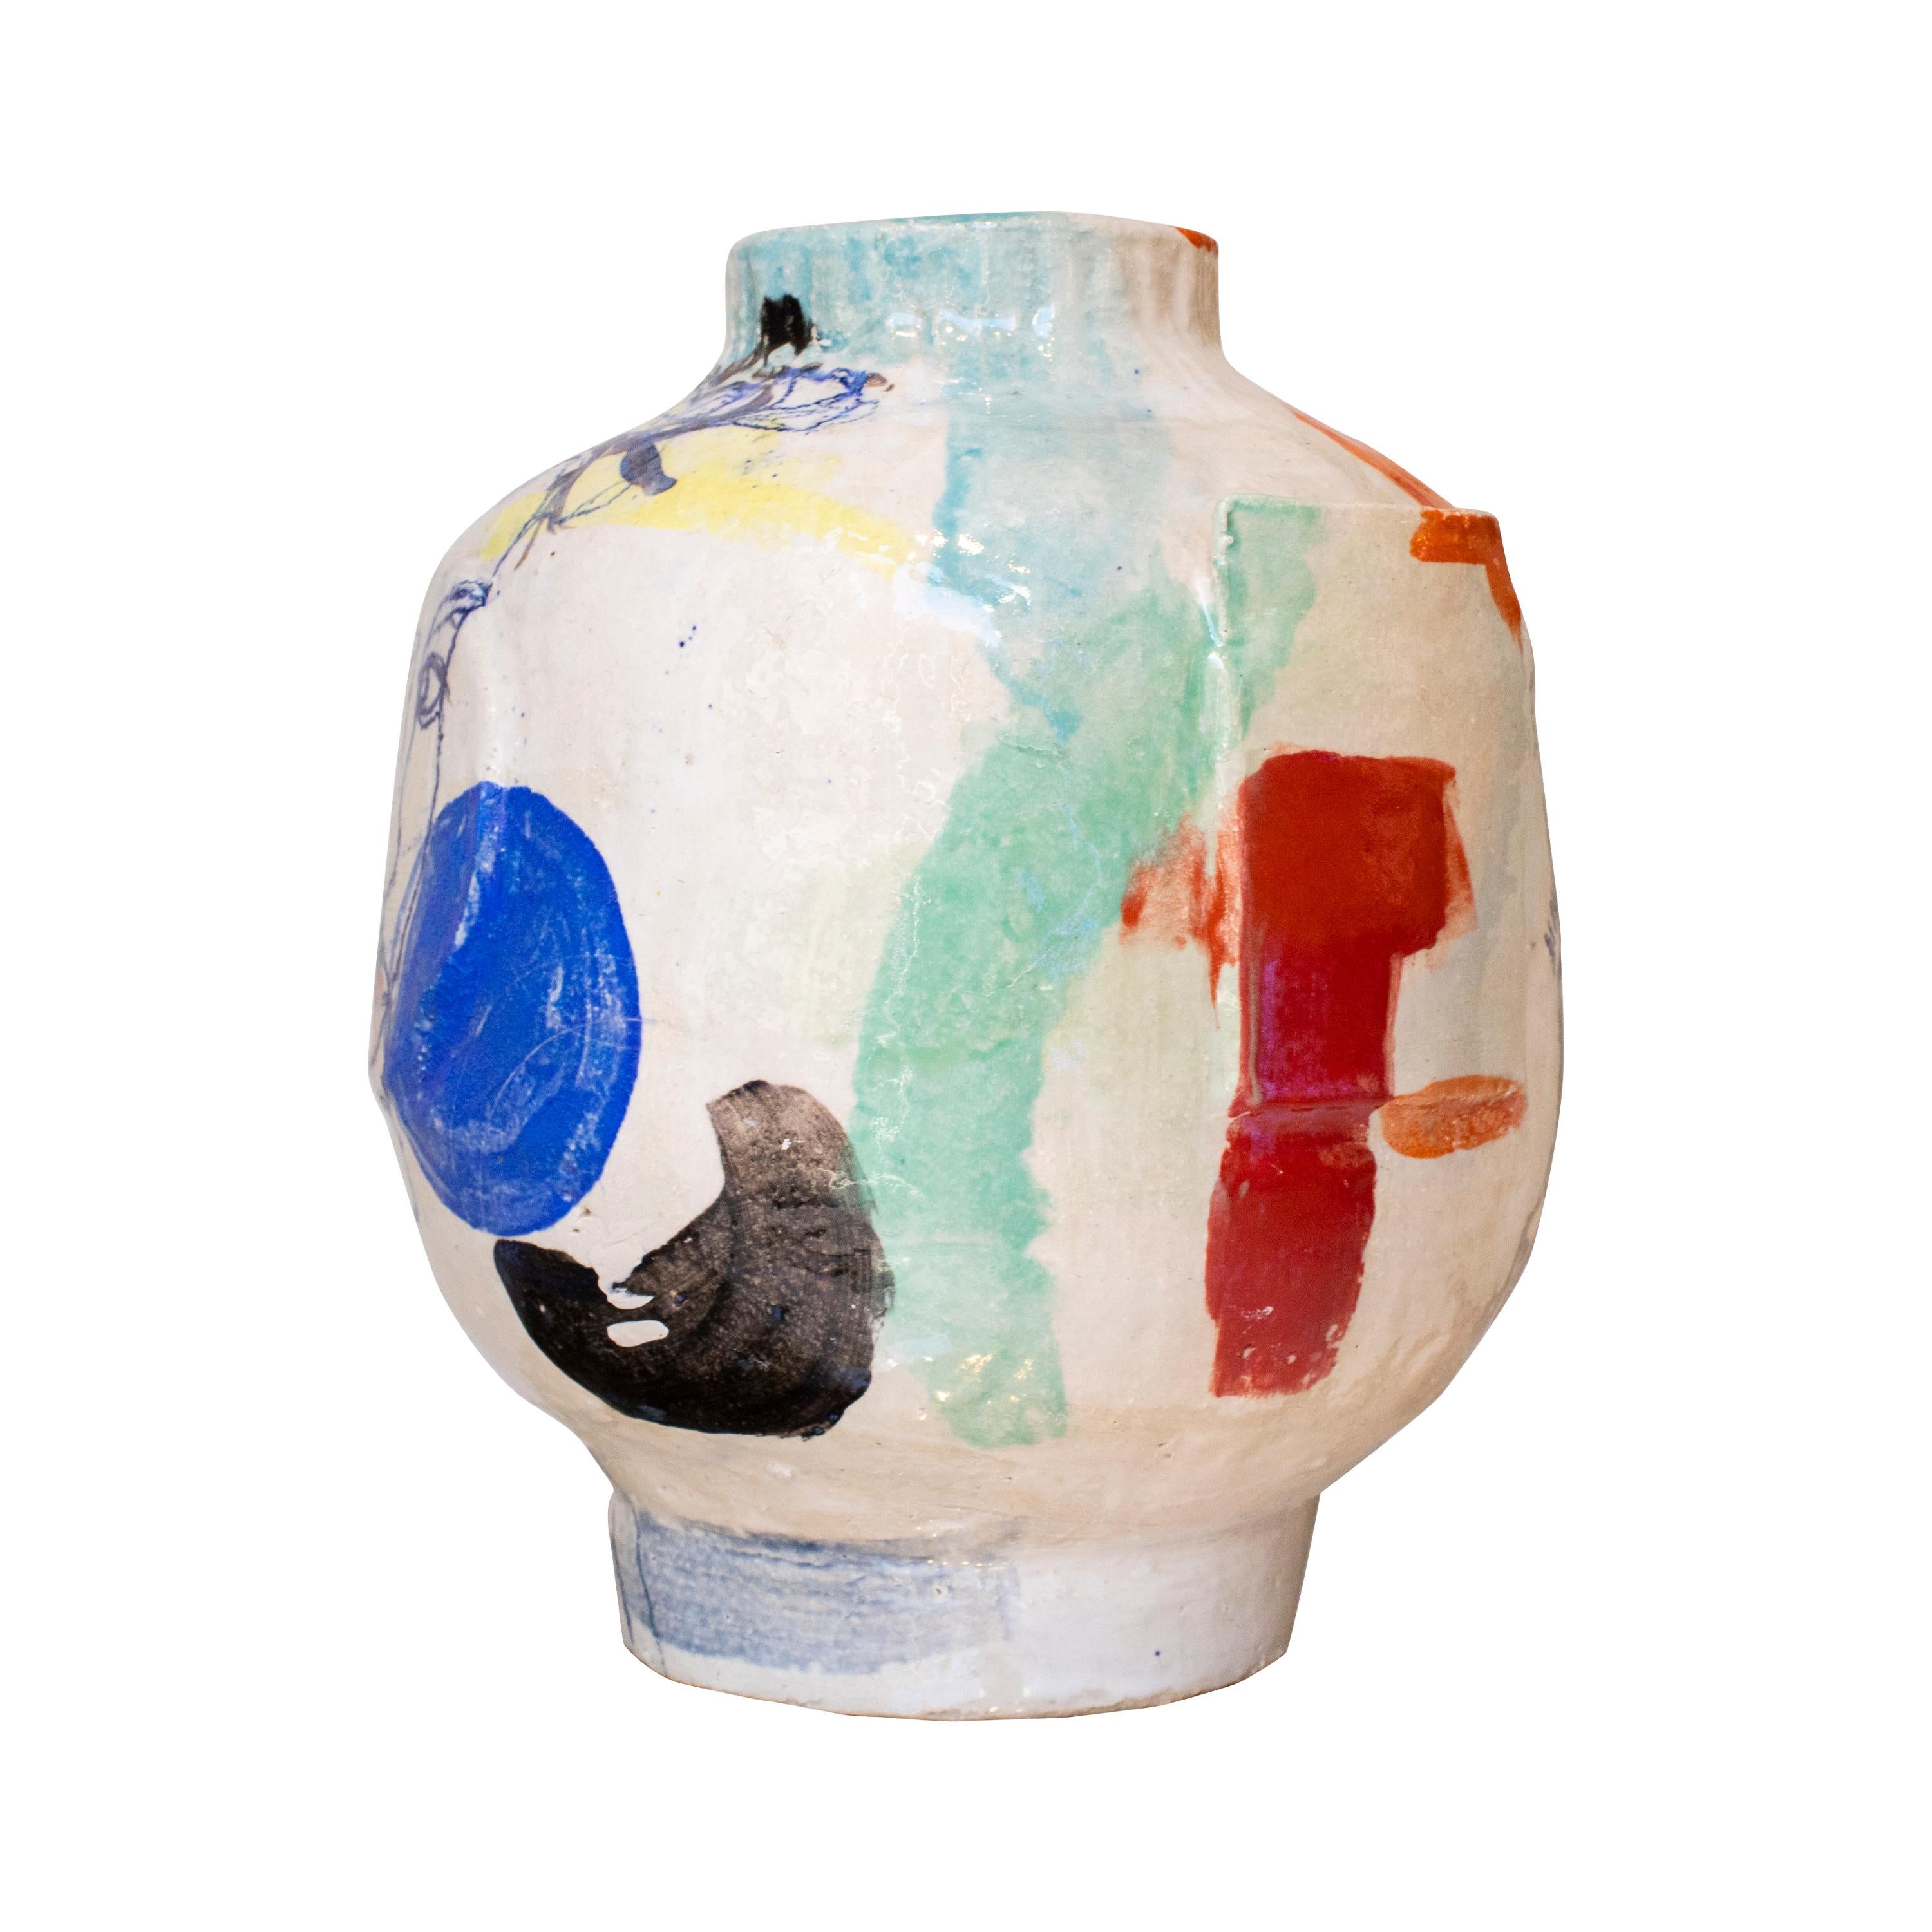 Handcrafted and painted modern vase designed by Spanish artist Ana Laso.

ANA LASO BAEZA is an artist from Madrid who develops her activity fundamentally as a painter and, for a few years, also as a ceramicist. She trained pictorially at the Prado